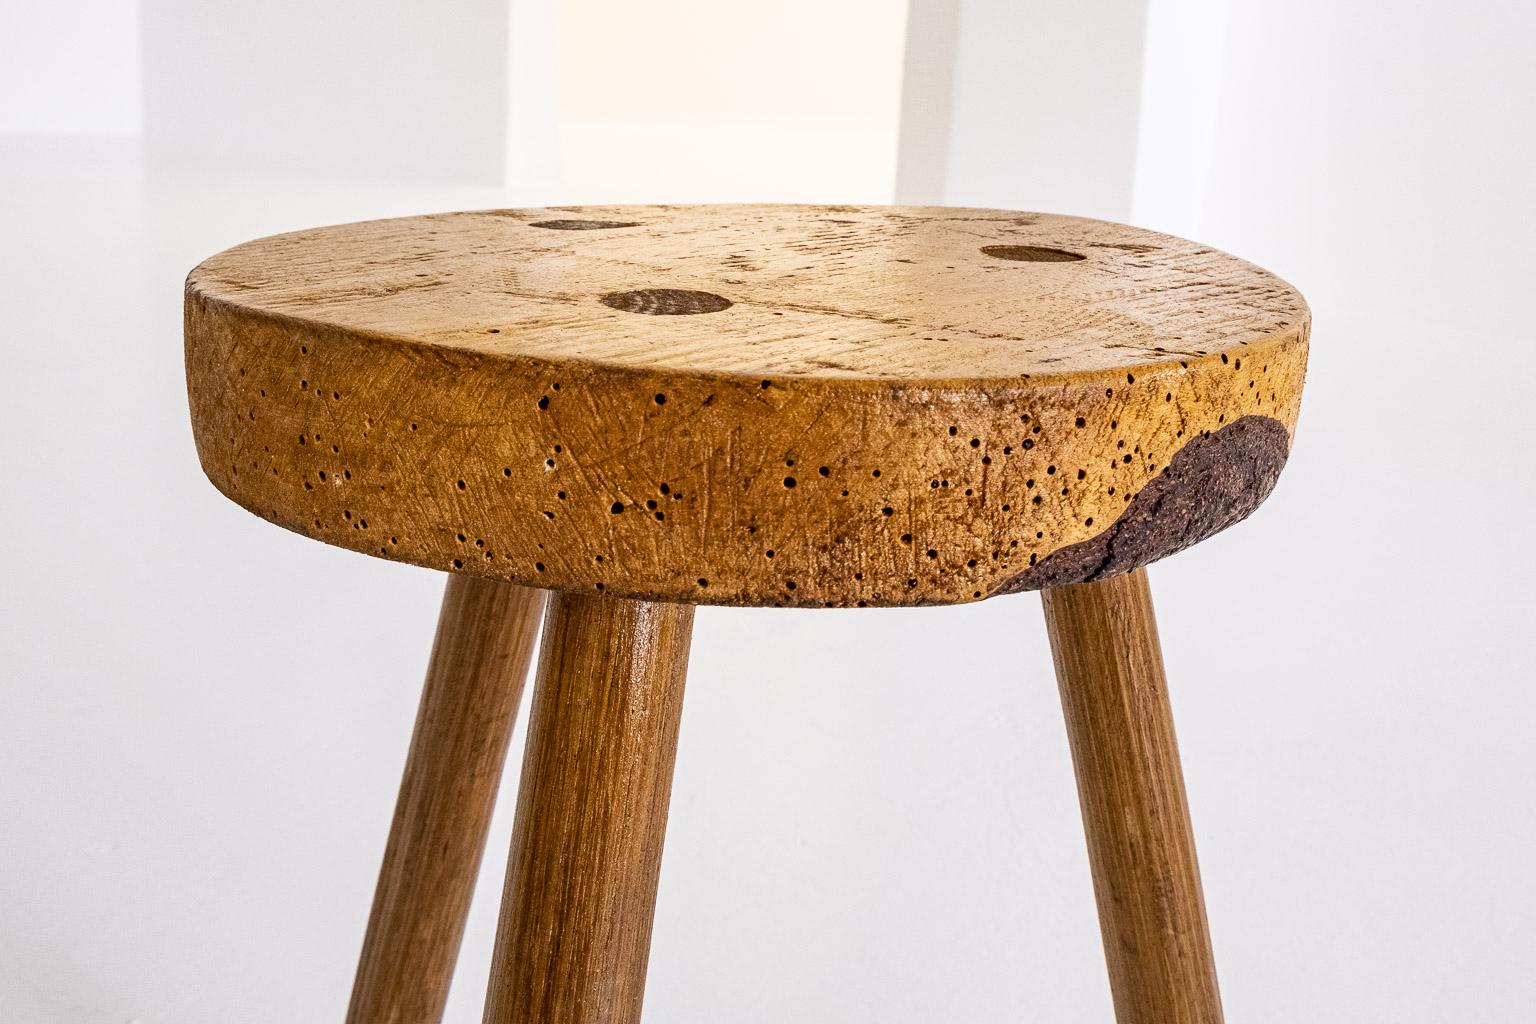 Set of 6, Wooden, Brutalist Tripod Stools or Side Tables, Italy, ca. 1960s For Sale 11